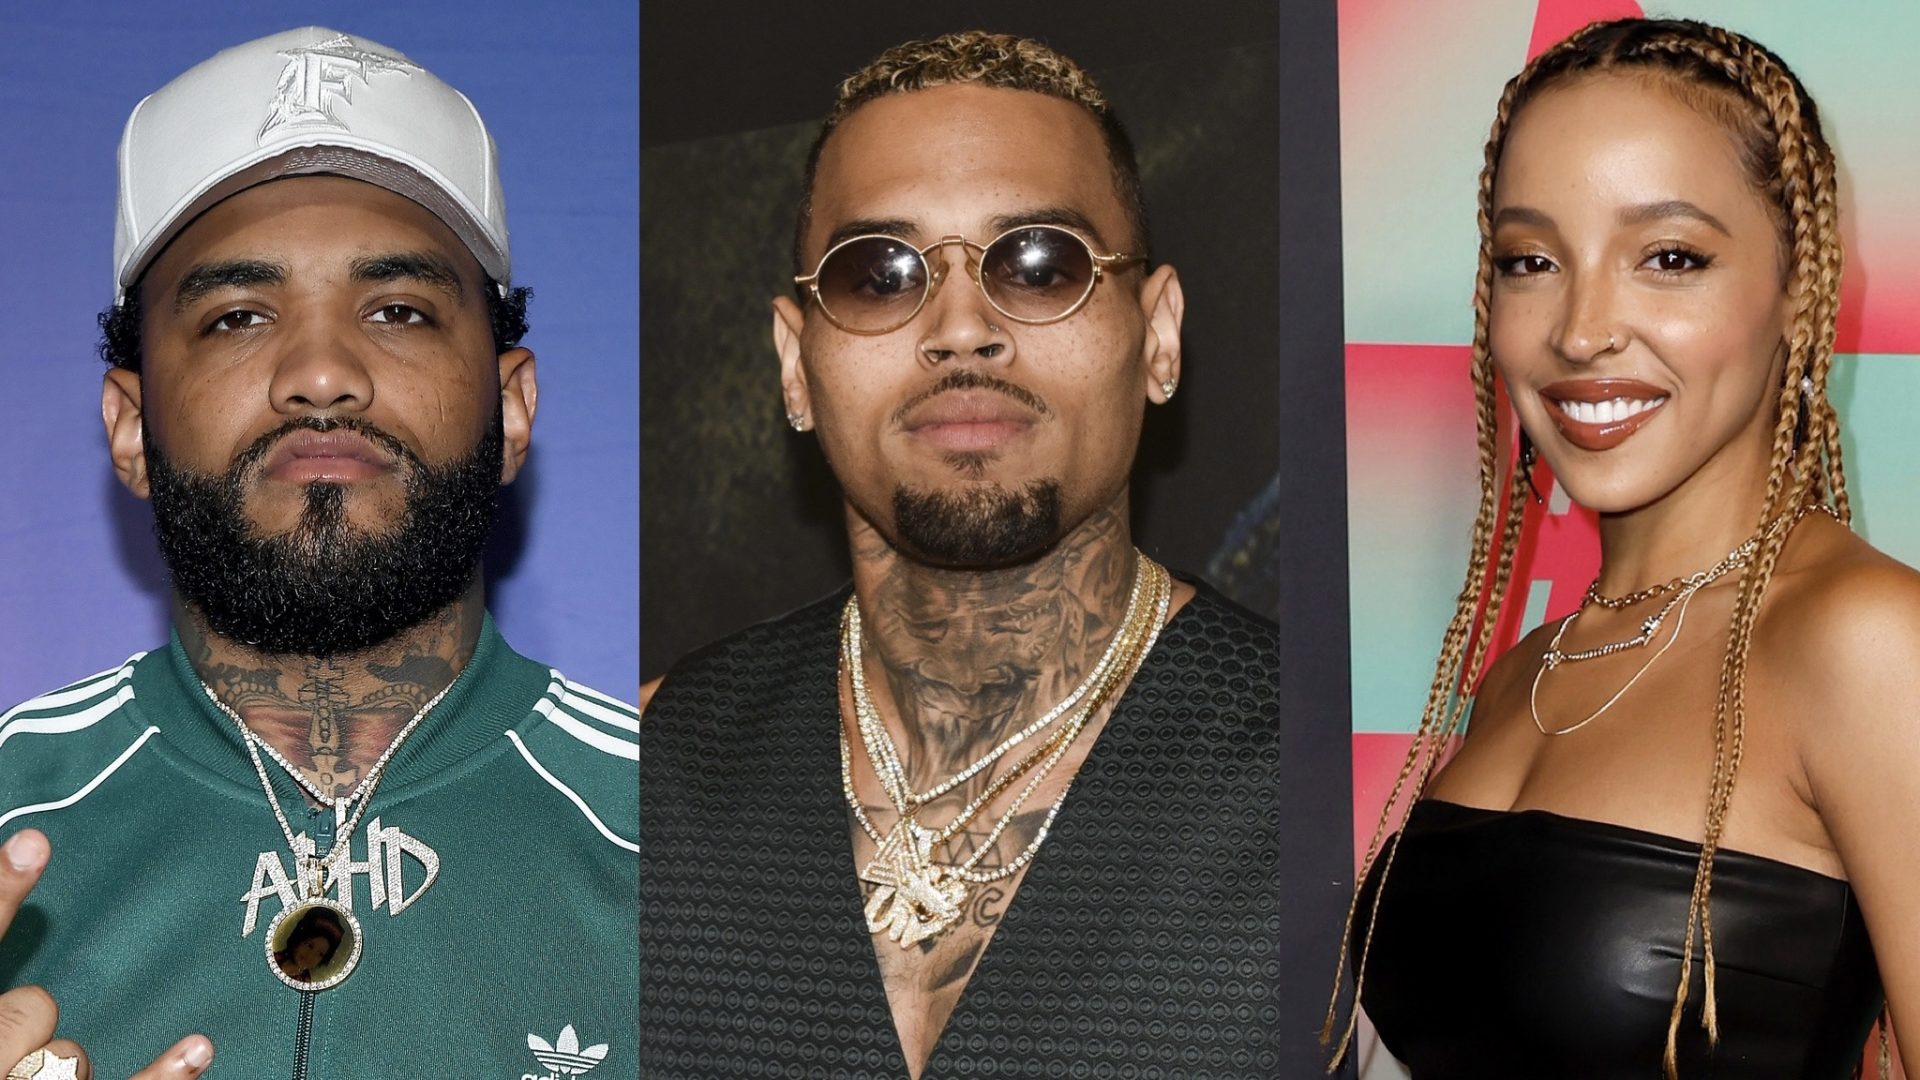 WATCH: Joyner Lucas Defends Chris Brown After Tinashe Seemingly Speaks Negatively Of Her 2015 Collab With The Singer